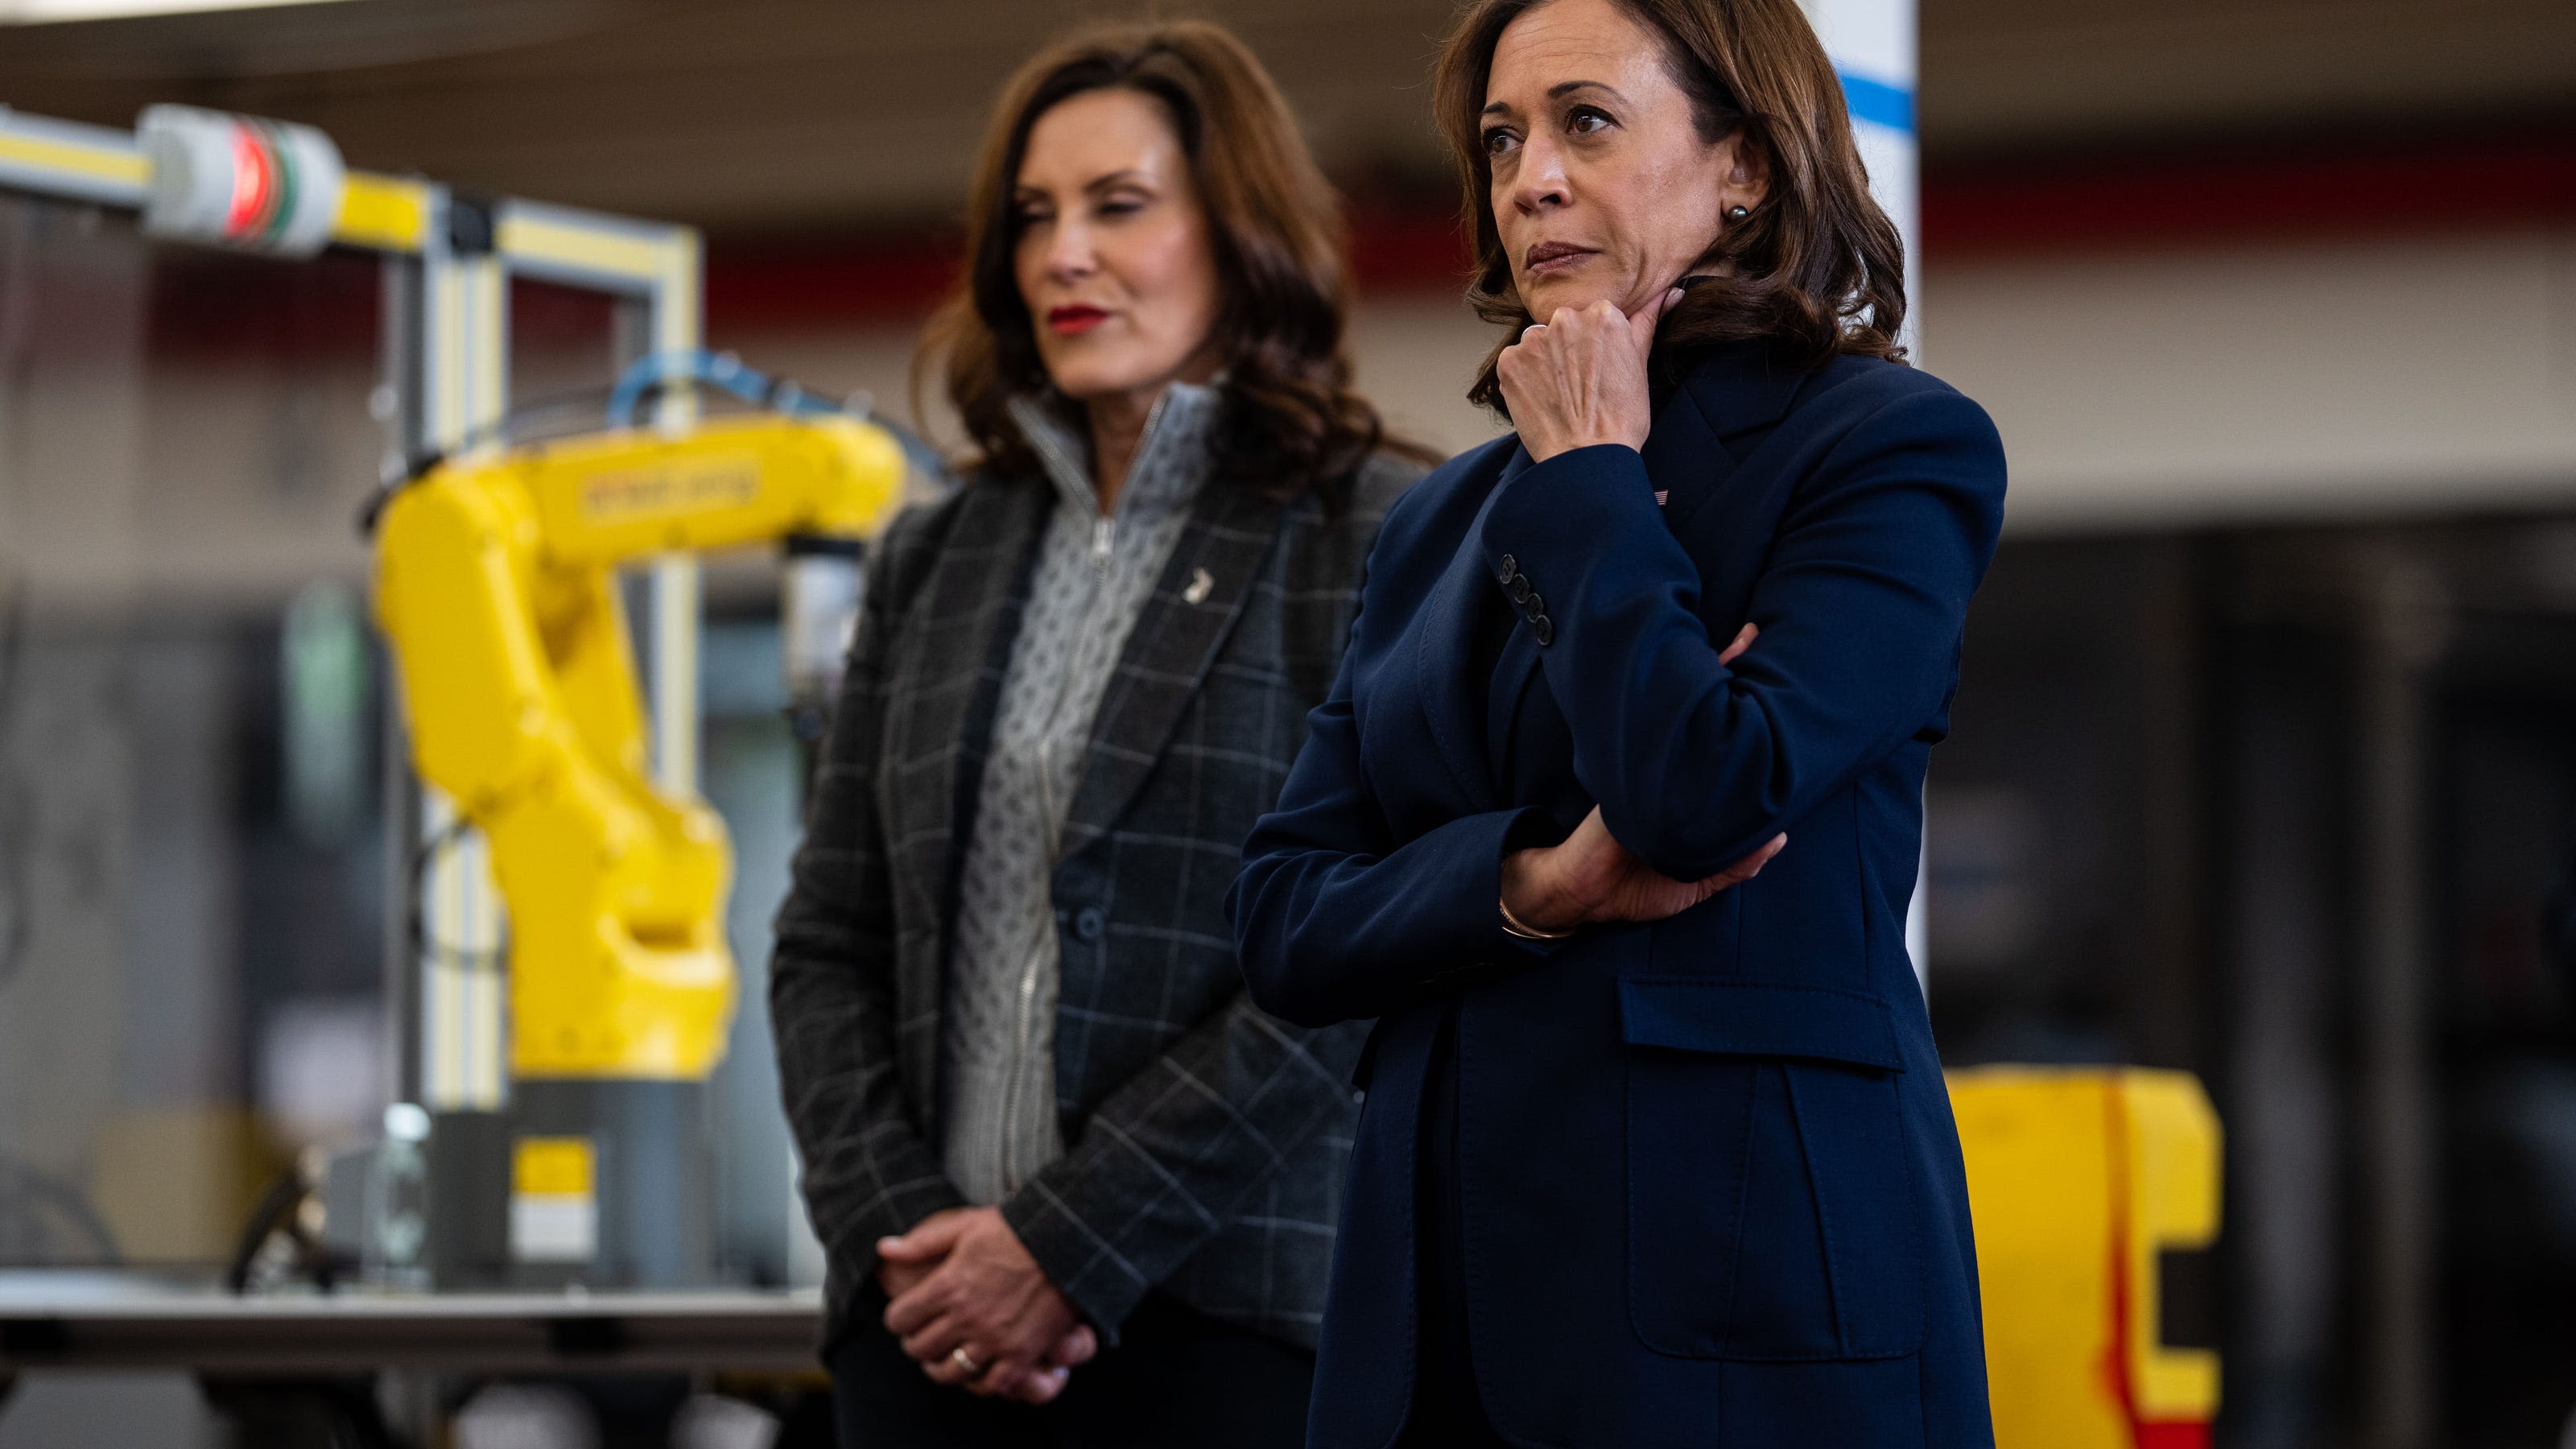 It's time. Biden should drop out so Democrats can run a historic two-woman ticket.